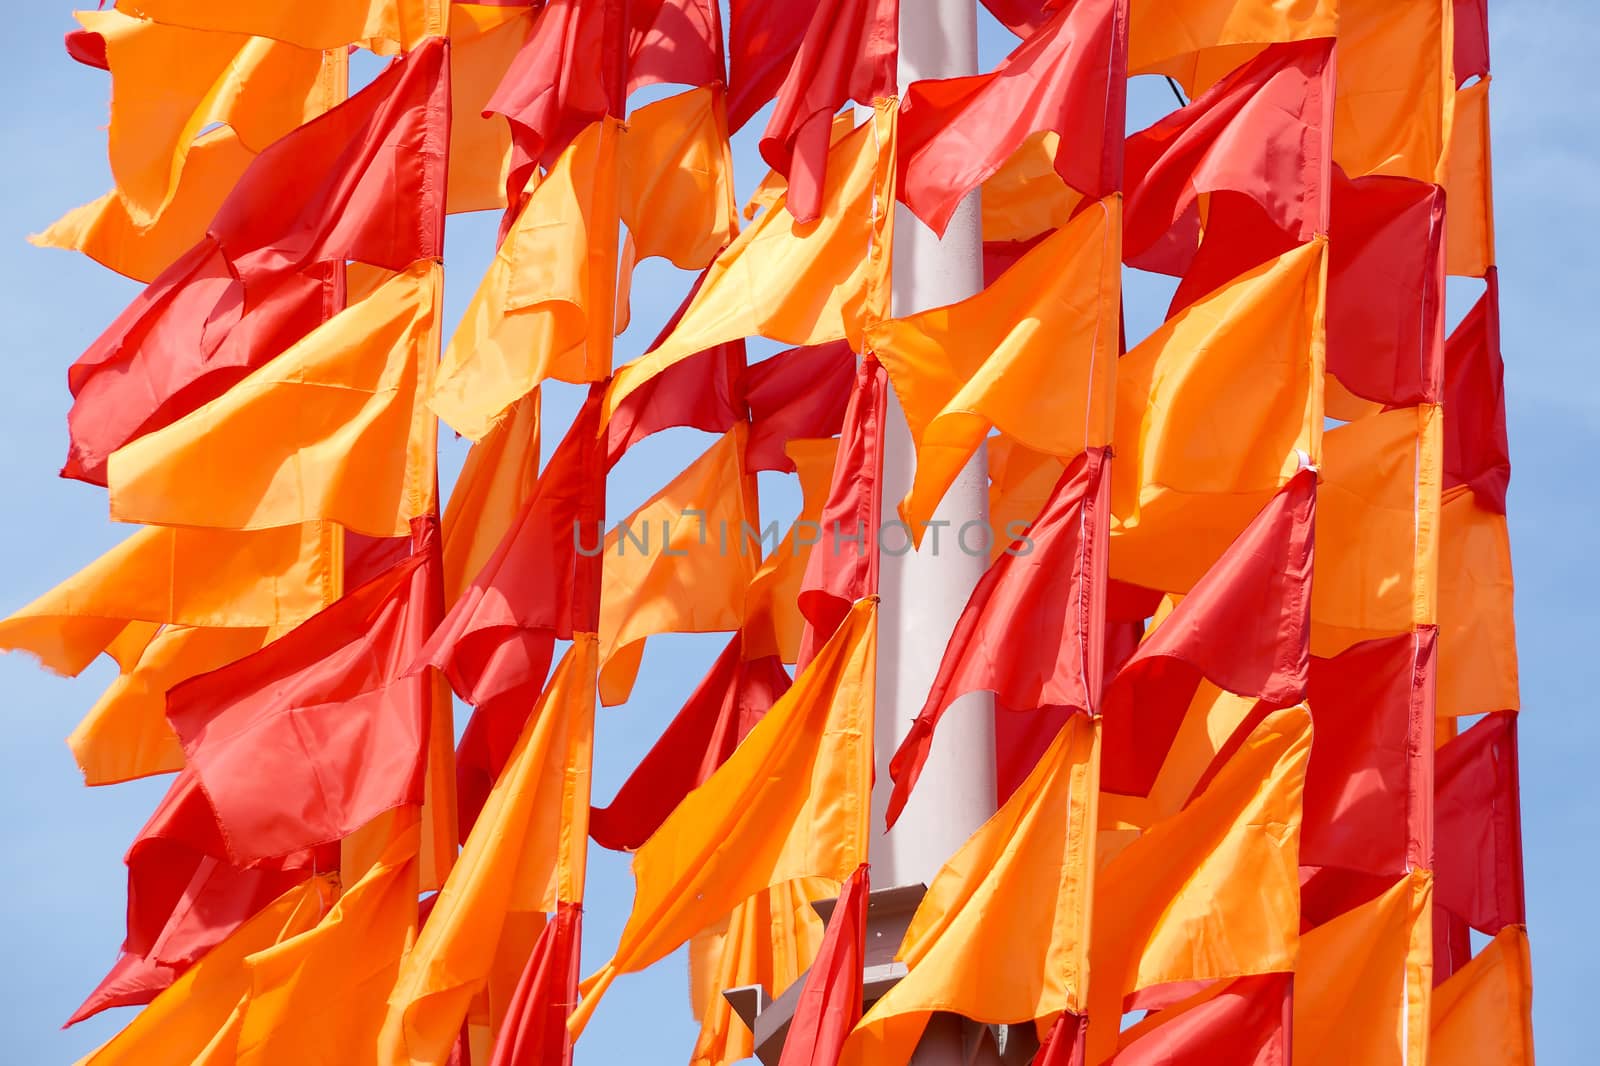 Festive flags of red and orange color by Vadimdem